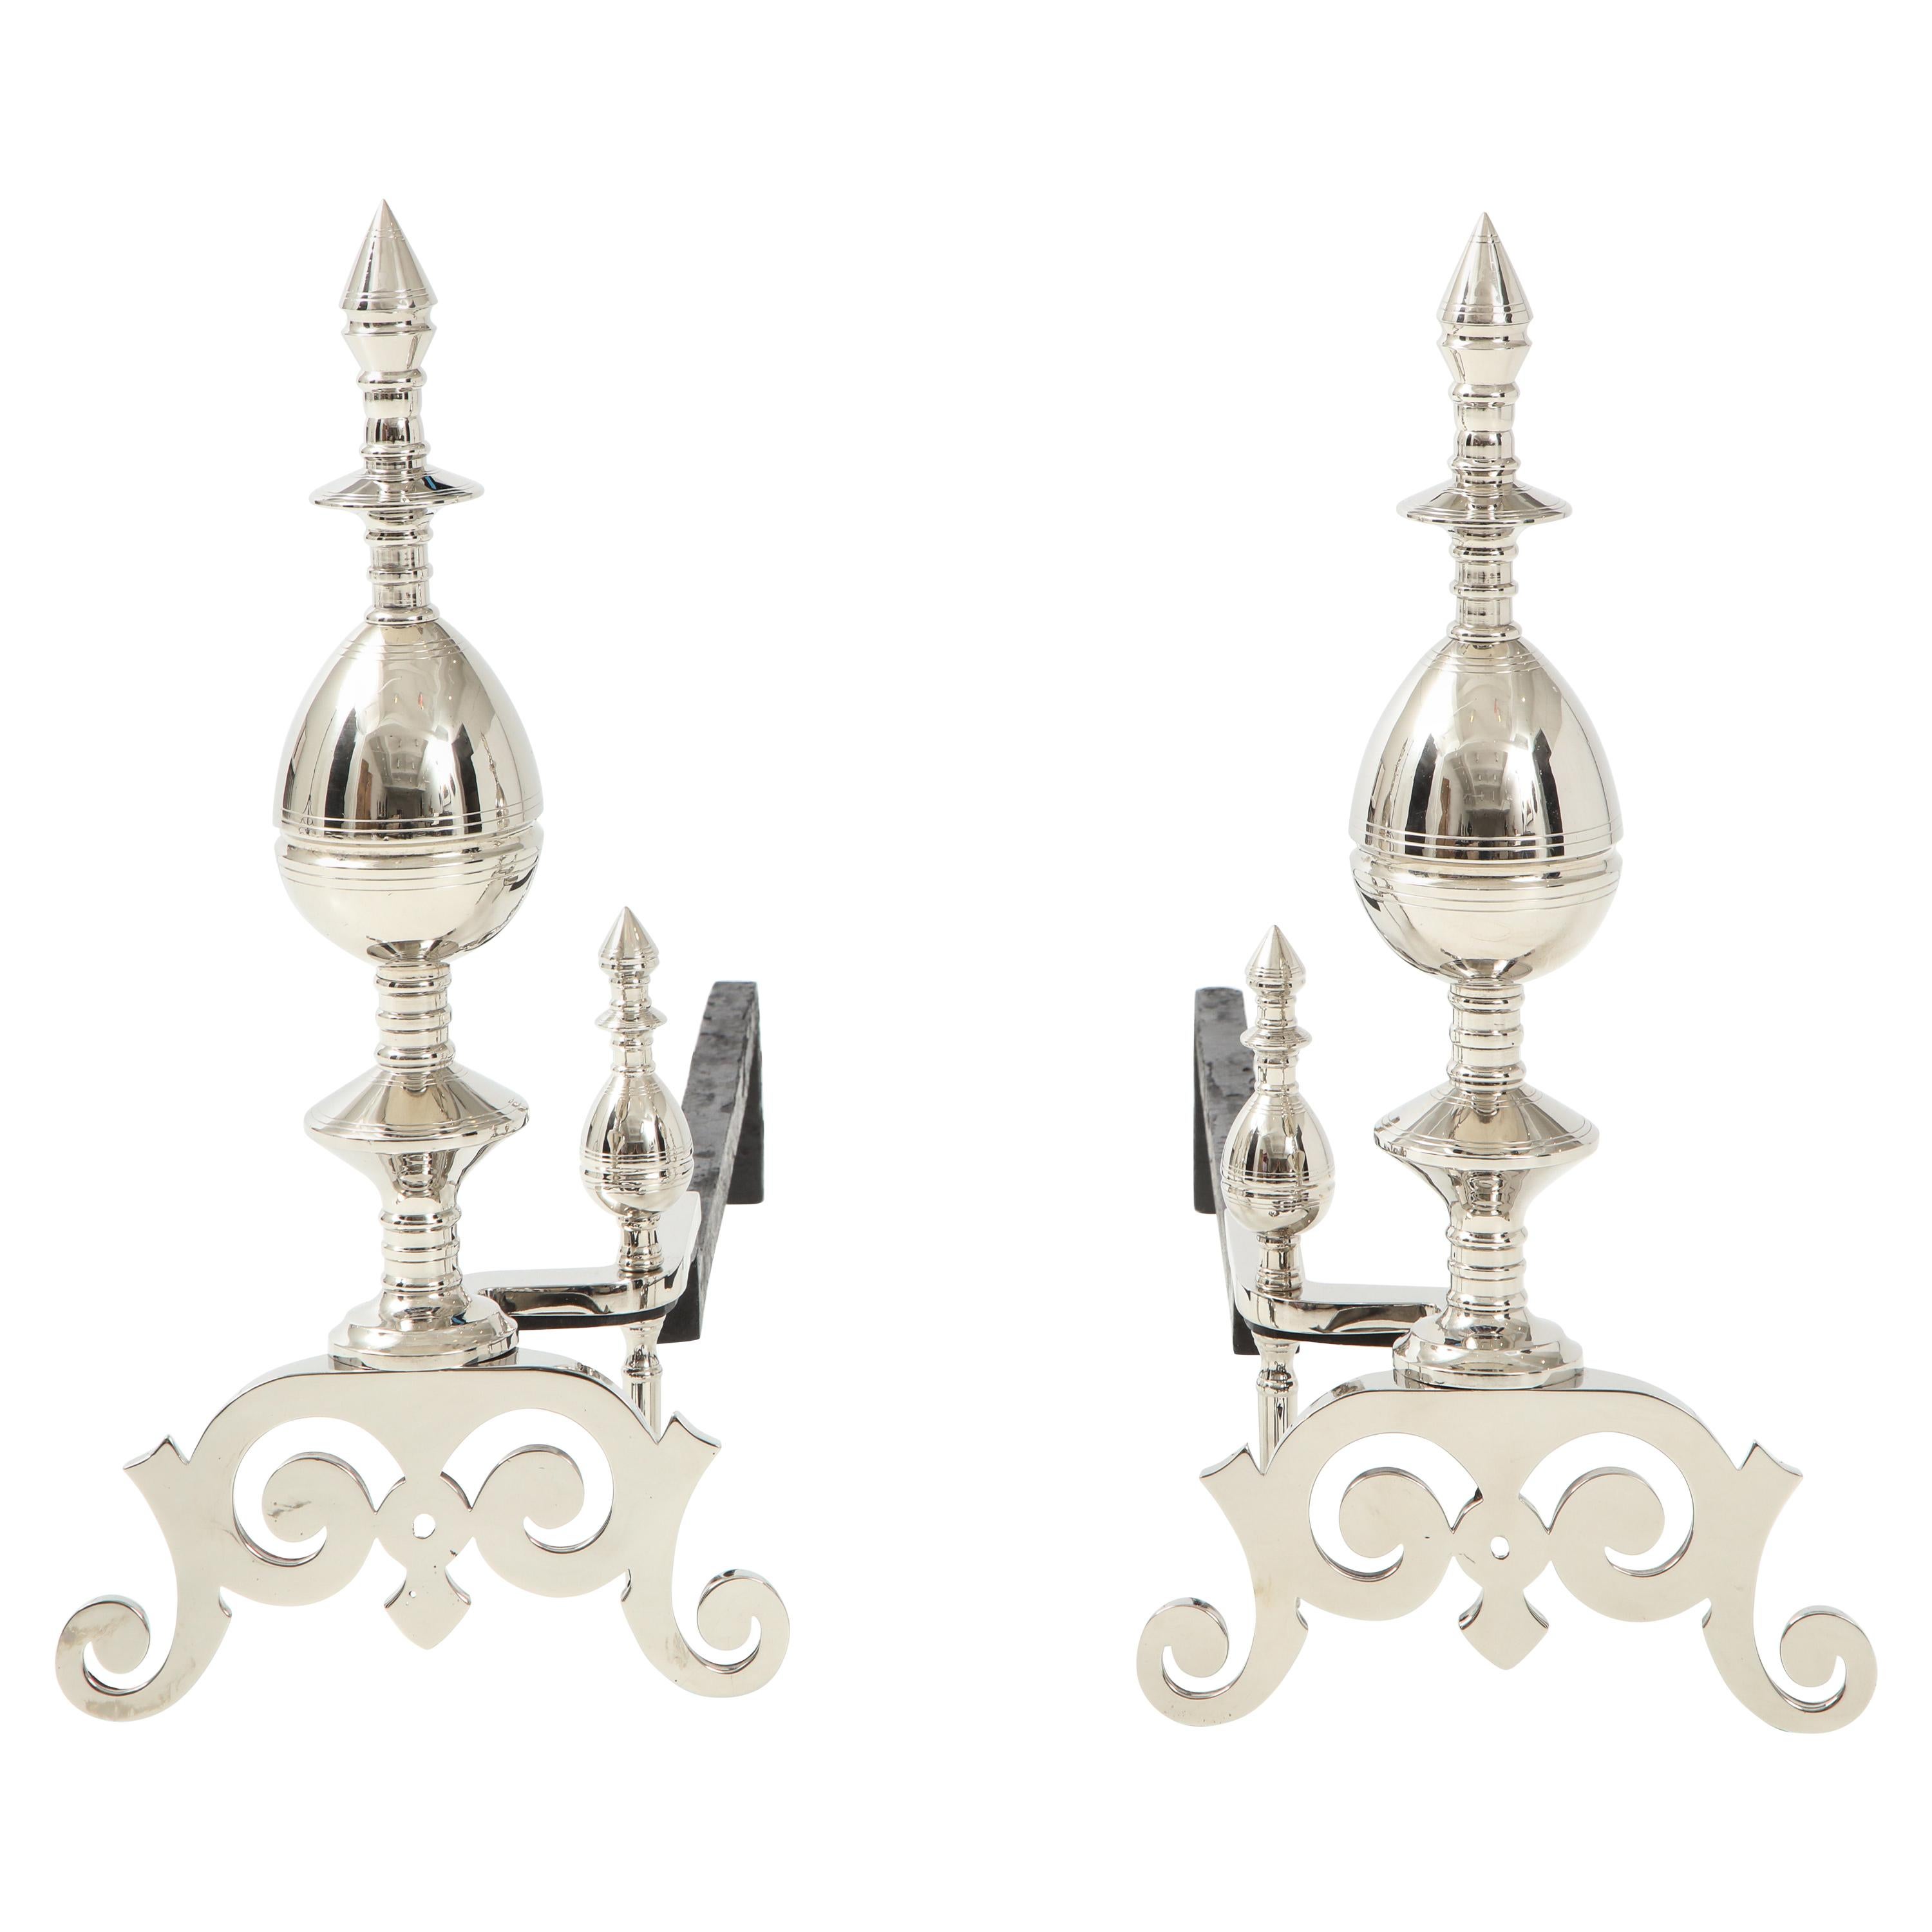 Art Deco Polished Nickel Spire Topped Andirons For Sale